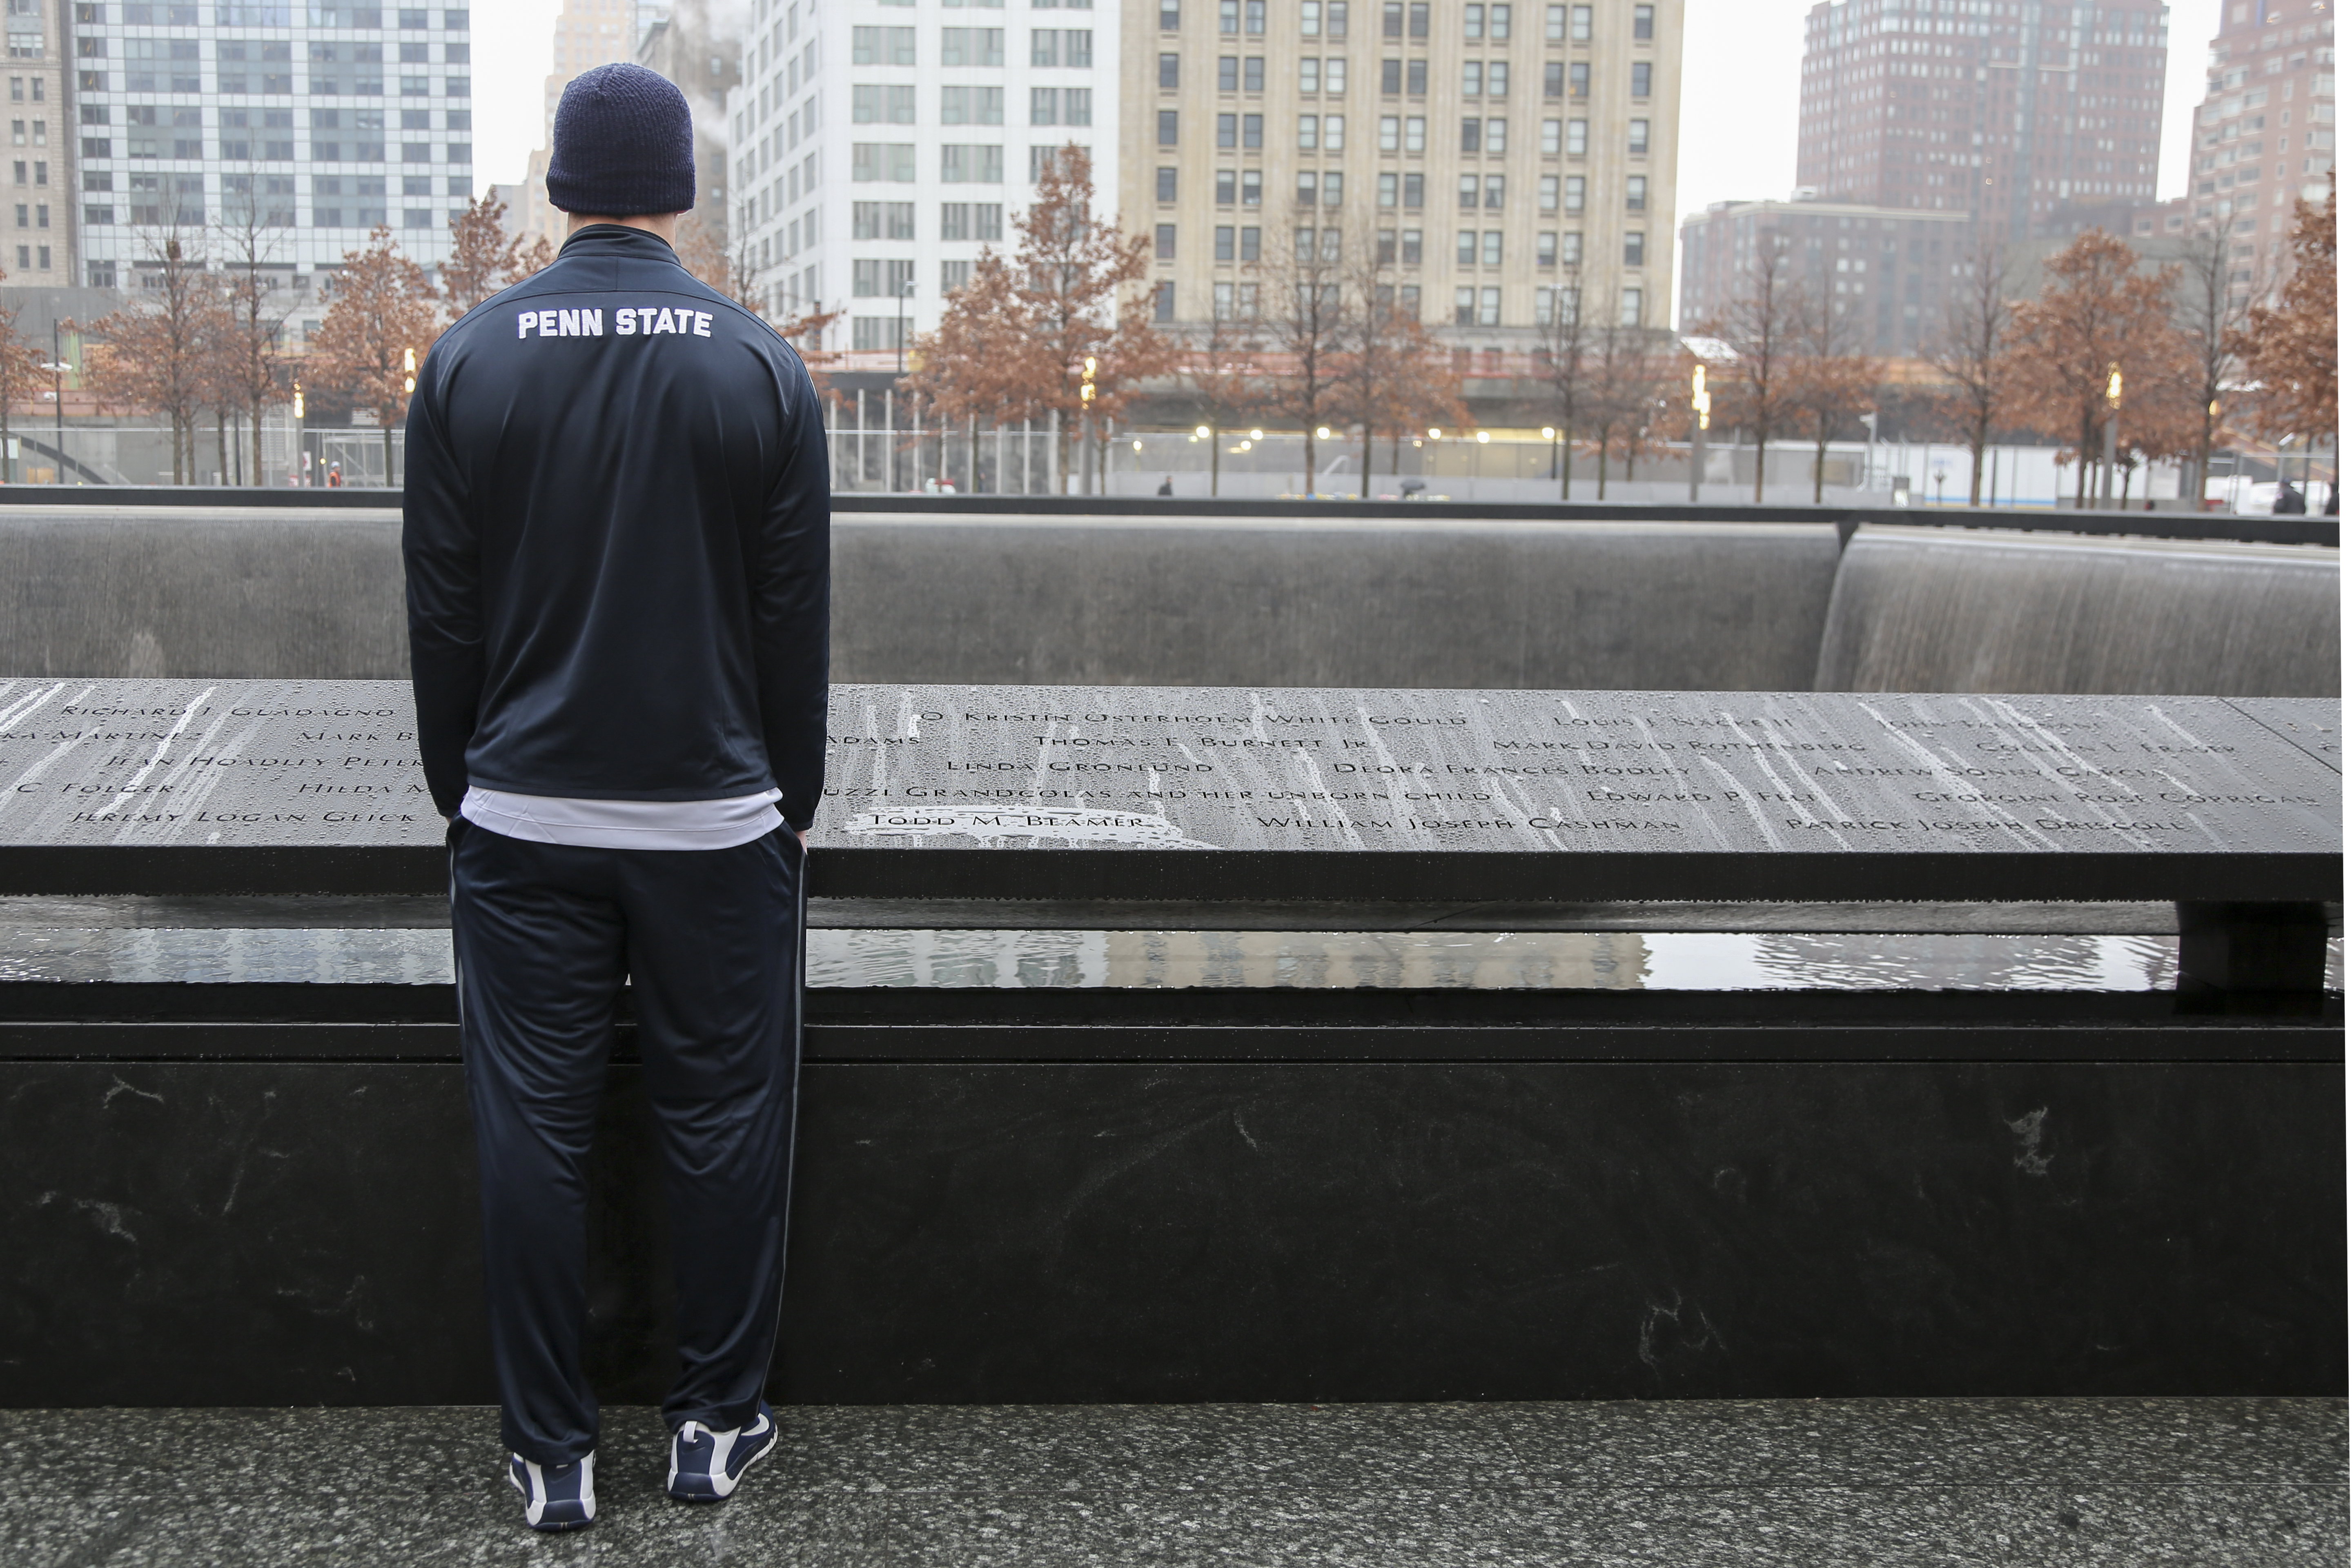 A Penn State University athlete honors victims of 9/11 at the Memorial. He is standing beside a bronze parapet with victims names on a rainy day. He is wearing a blue tracksuit that reads “Penn State.”